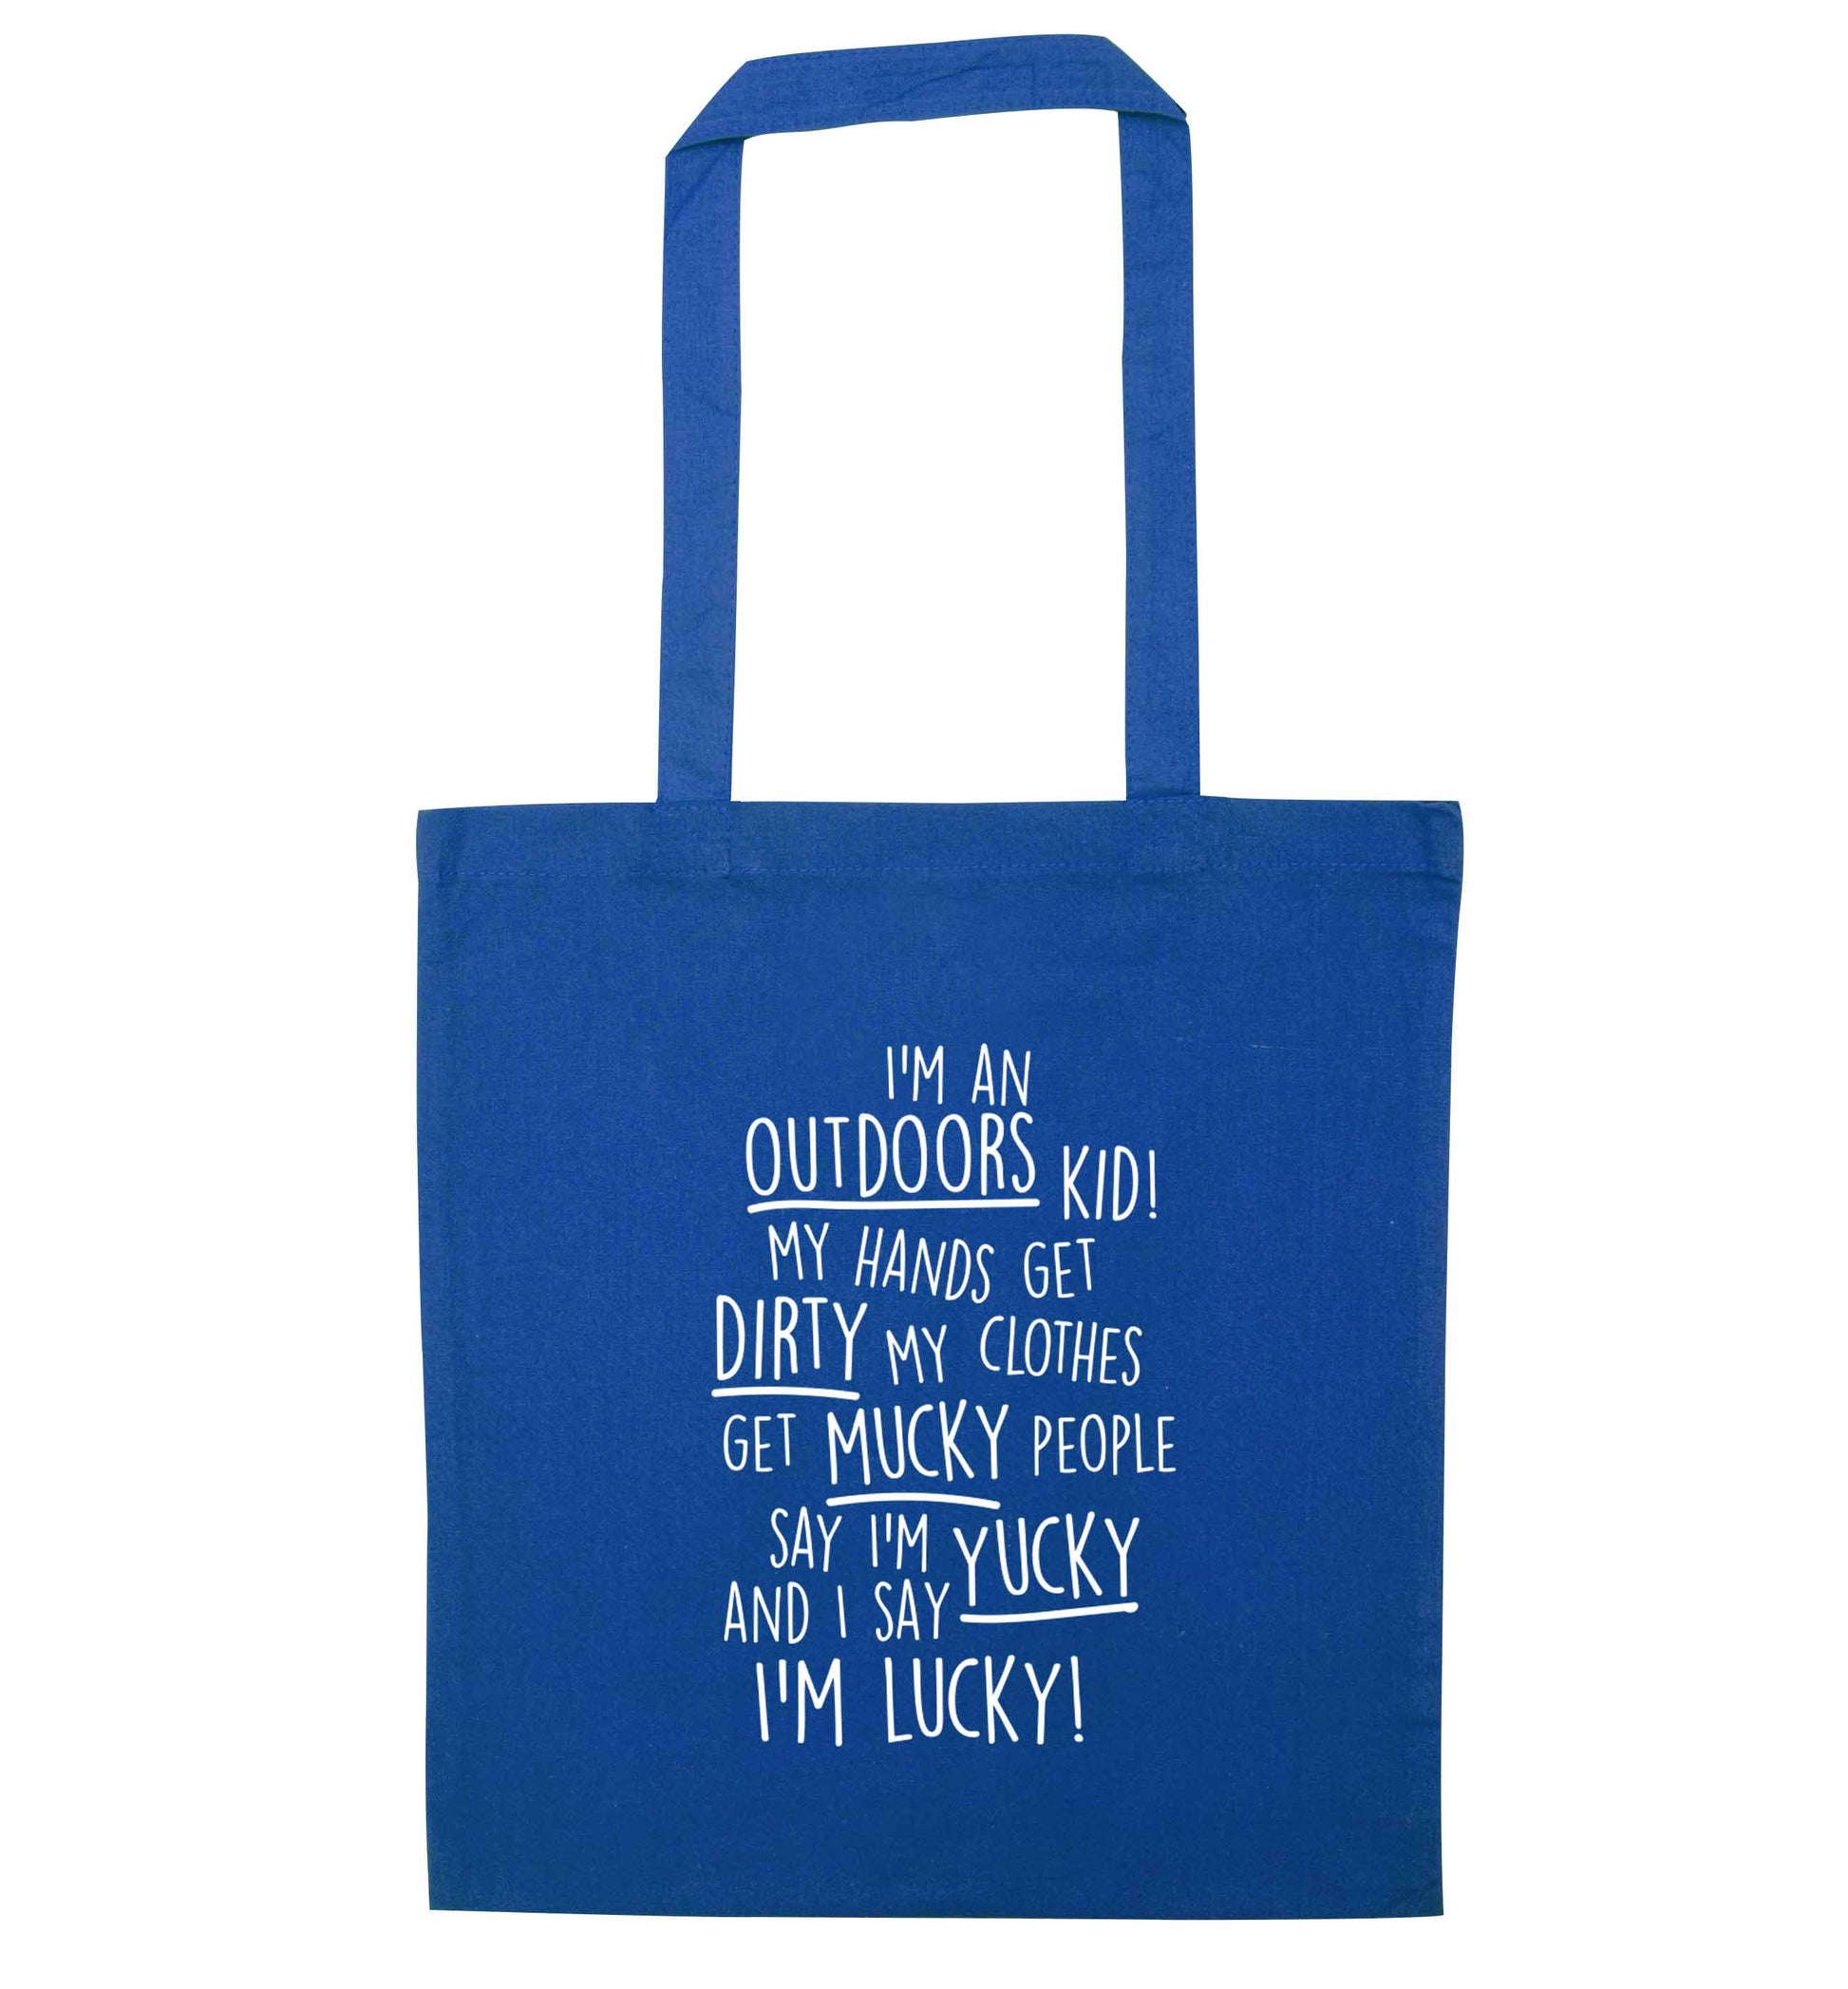 I'm an outdoors kid poem blue tote bag